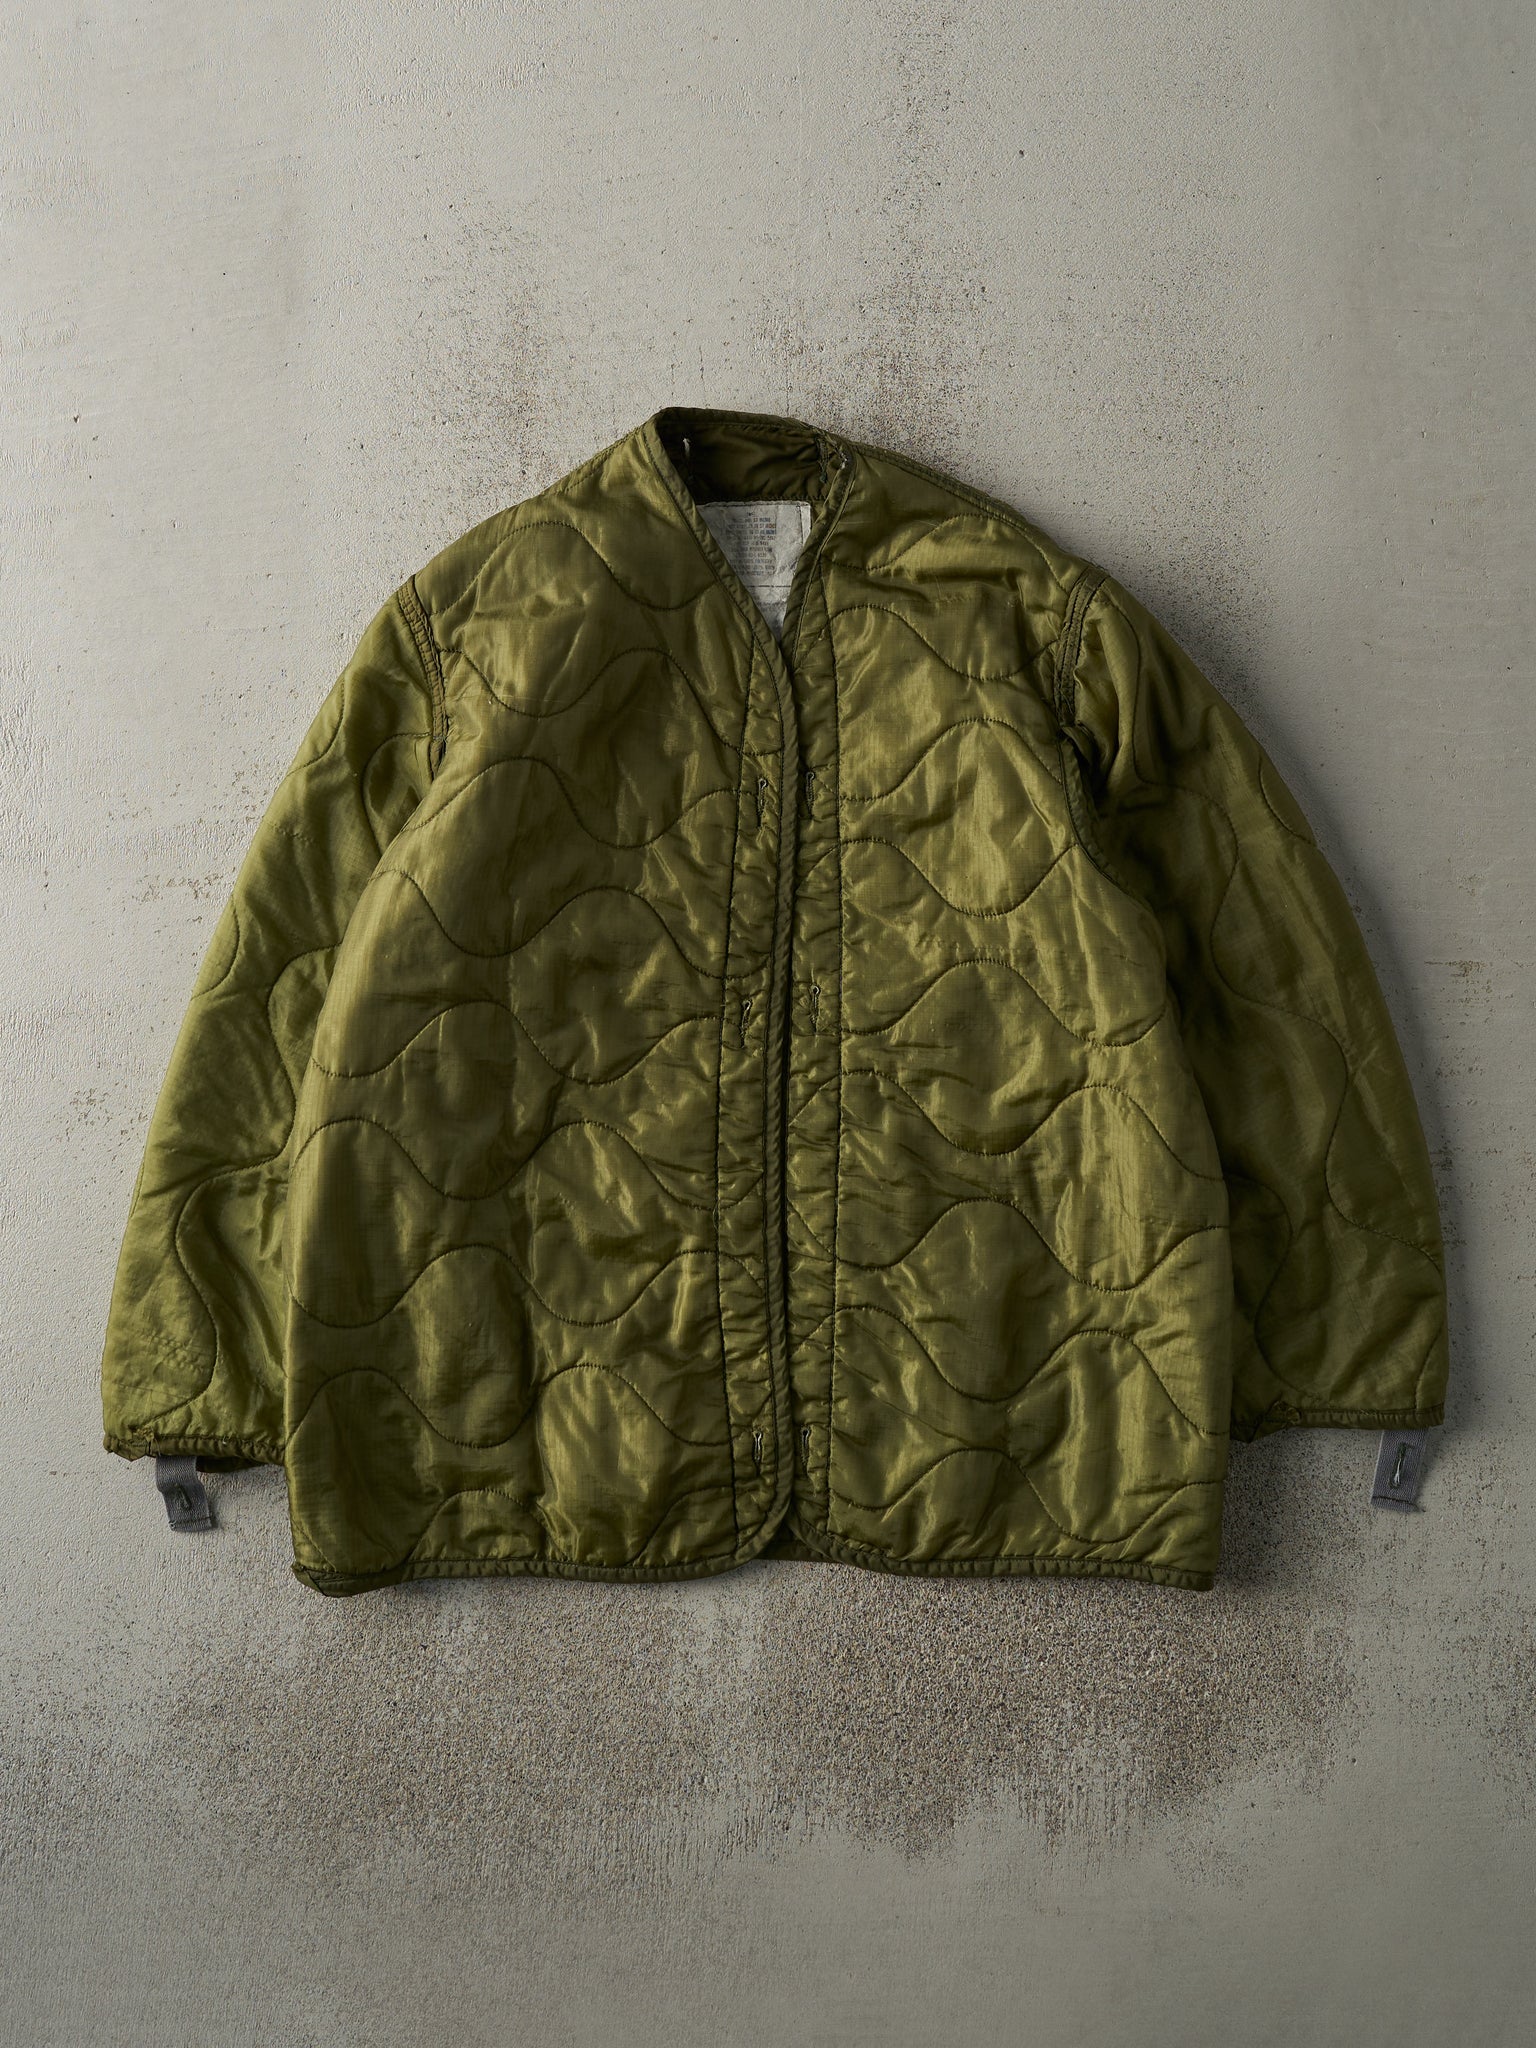 Vintage 90s Green Army Liner Jacket (S/M)